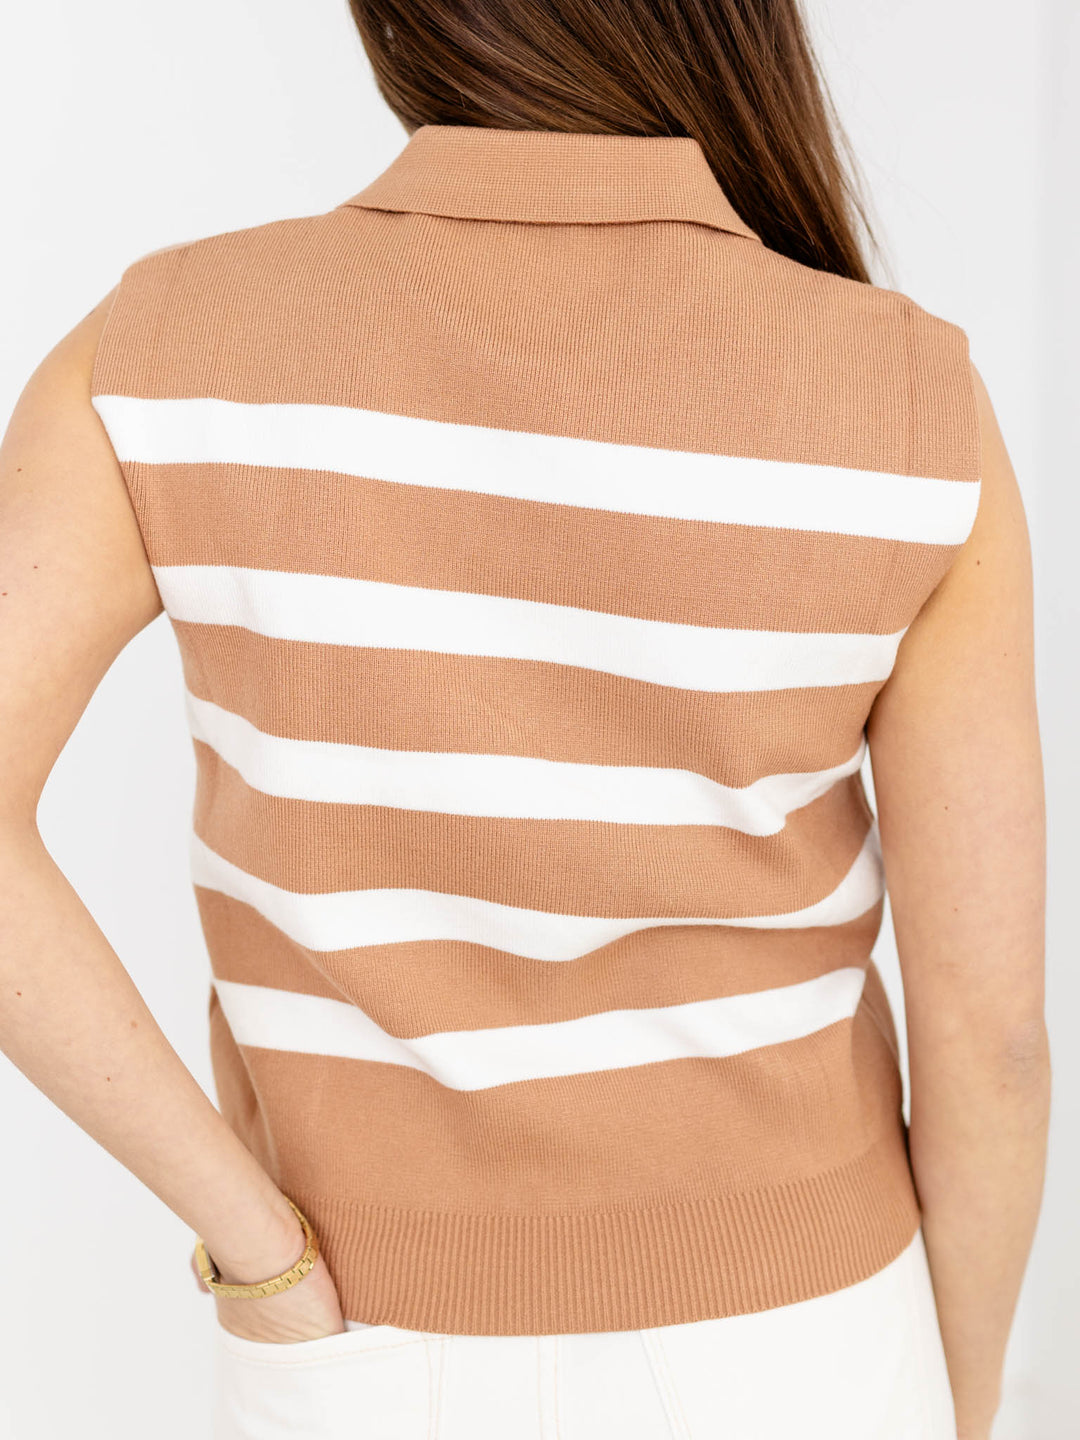 Striped Sleeveless Collared TopKnit tops